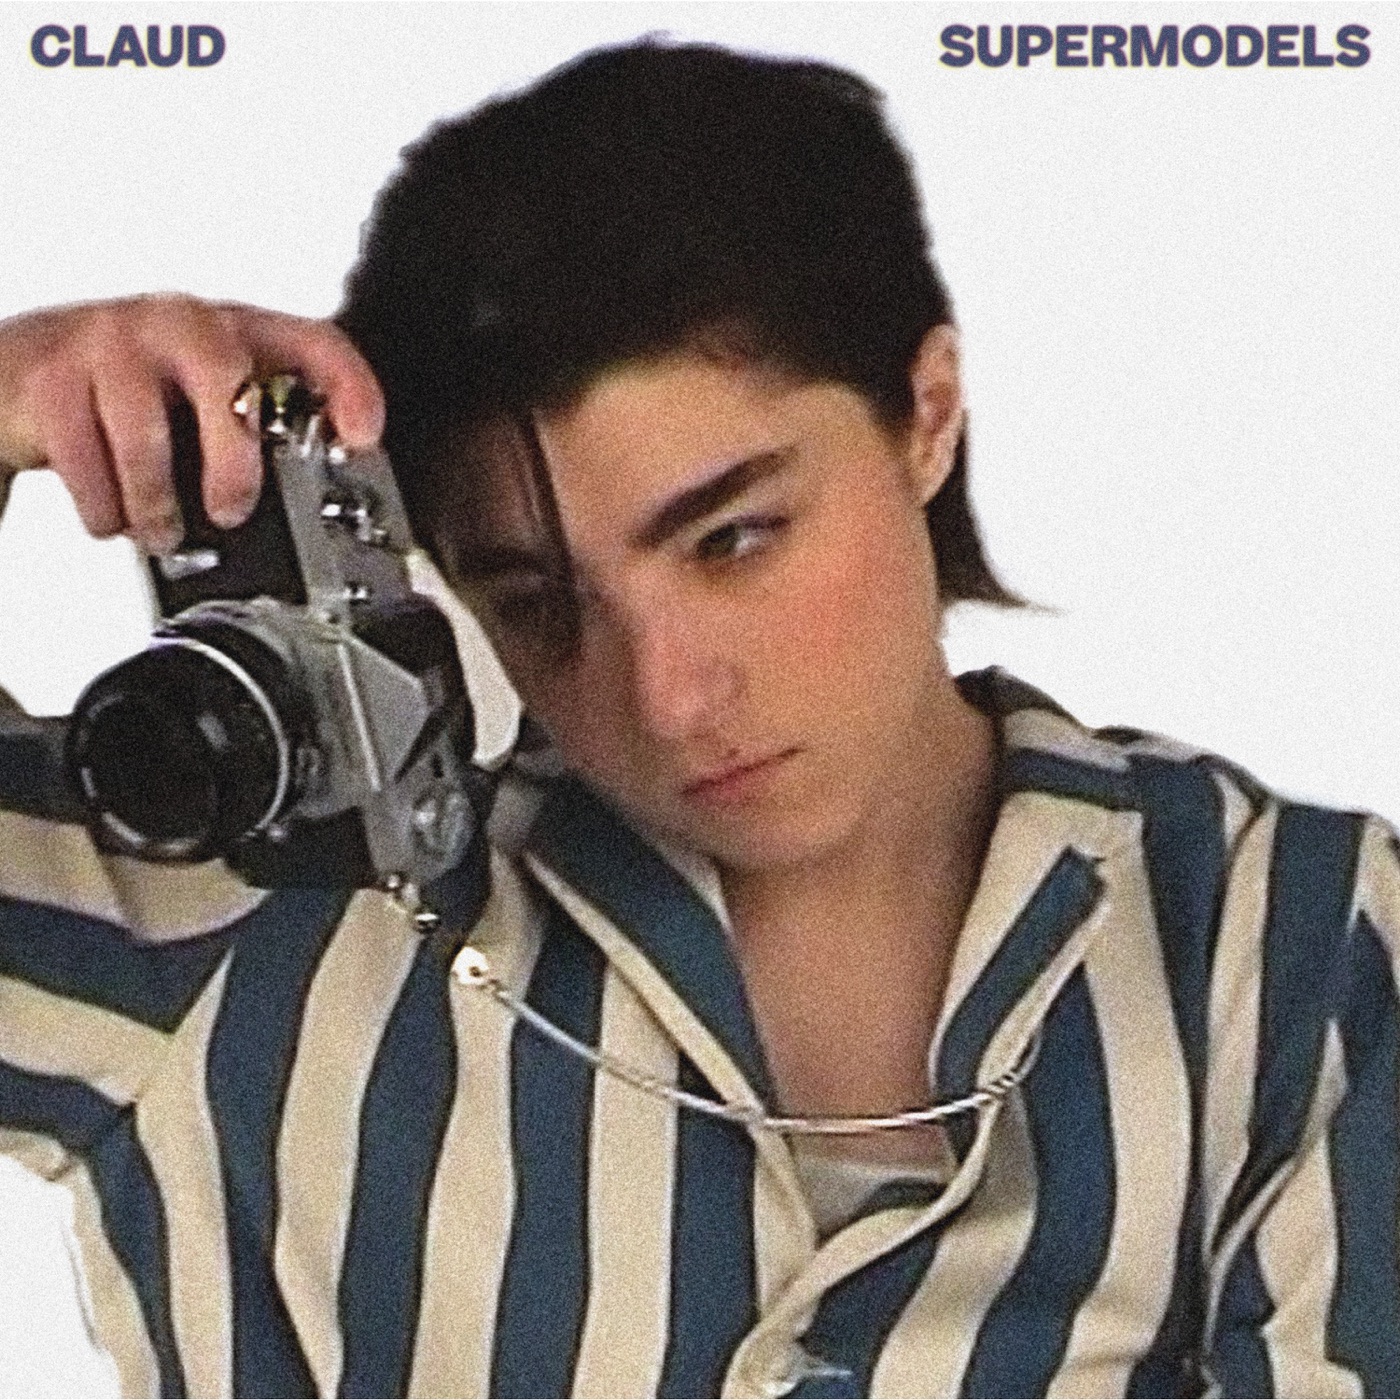 Supermodels by Claud